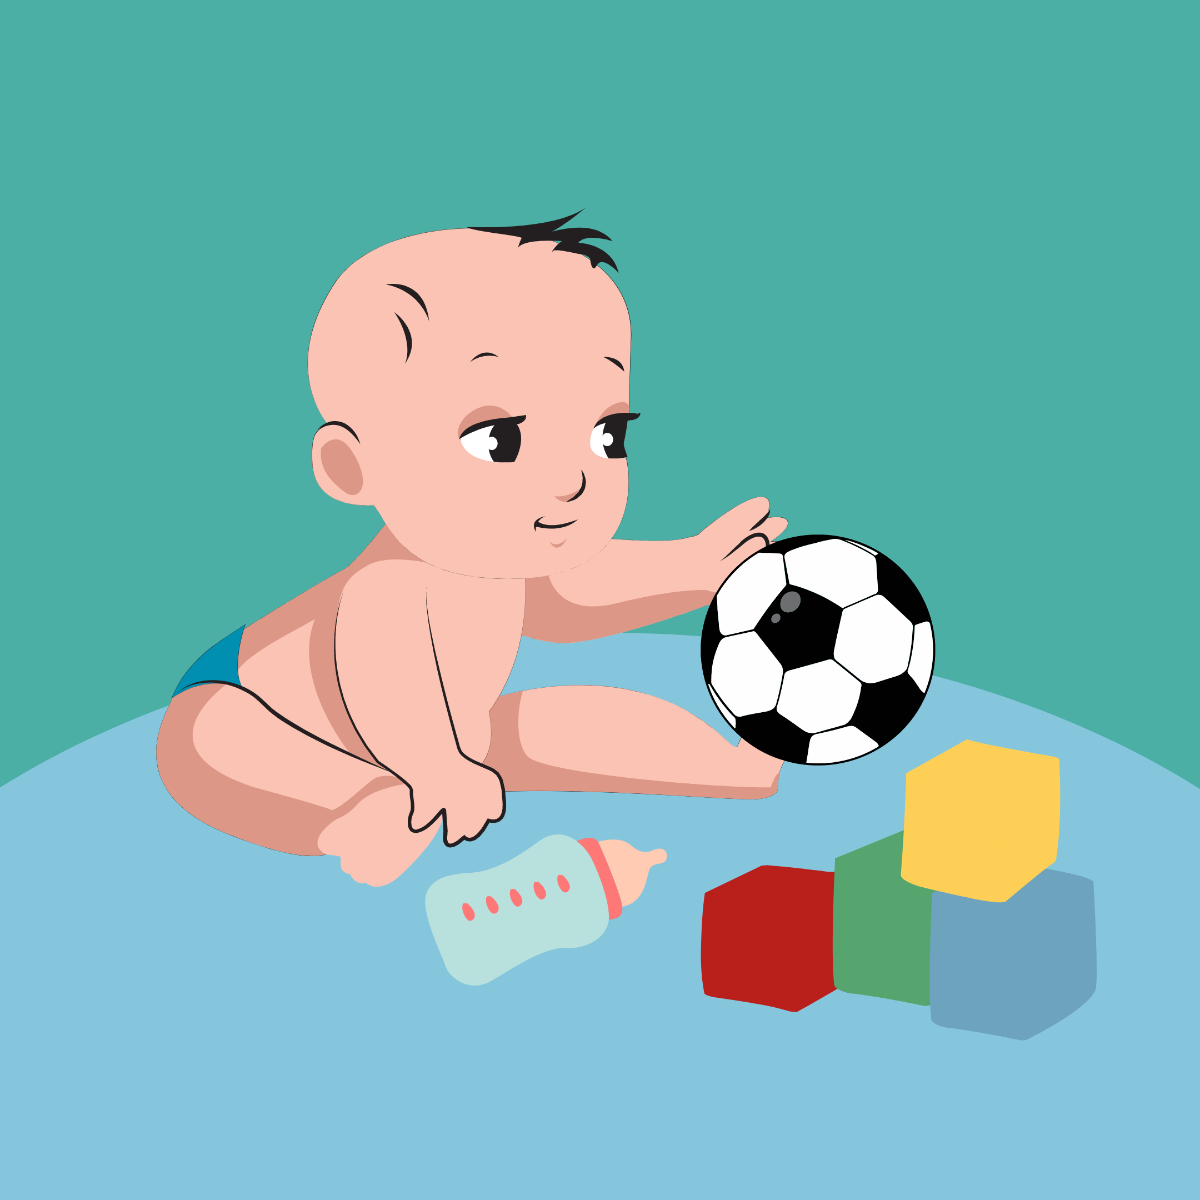 Free Baby Image Template